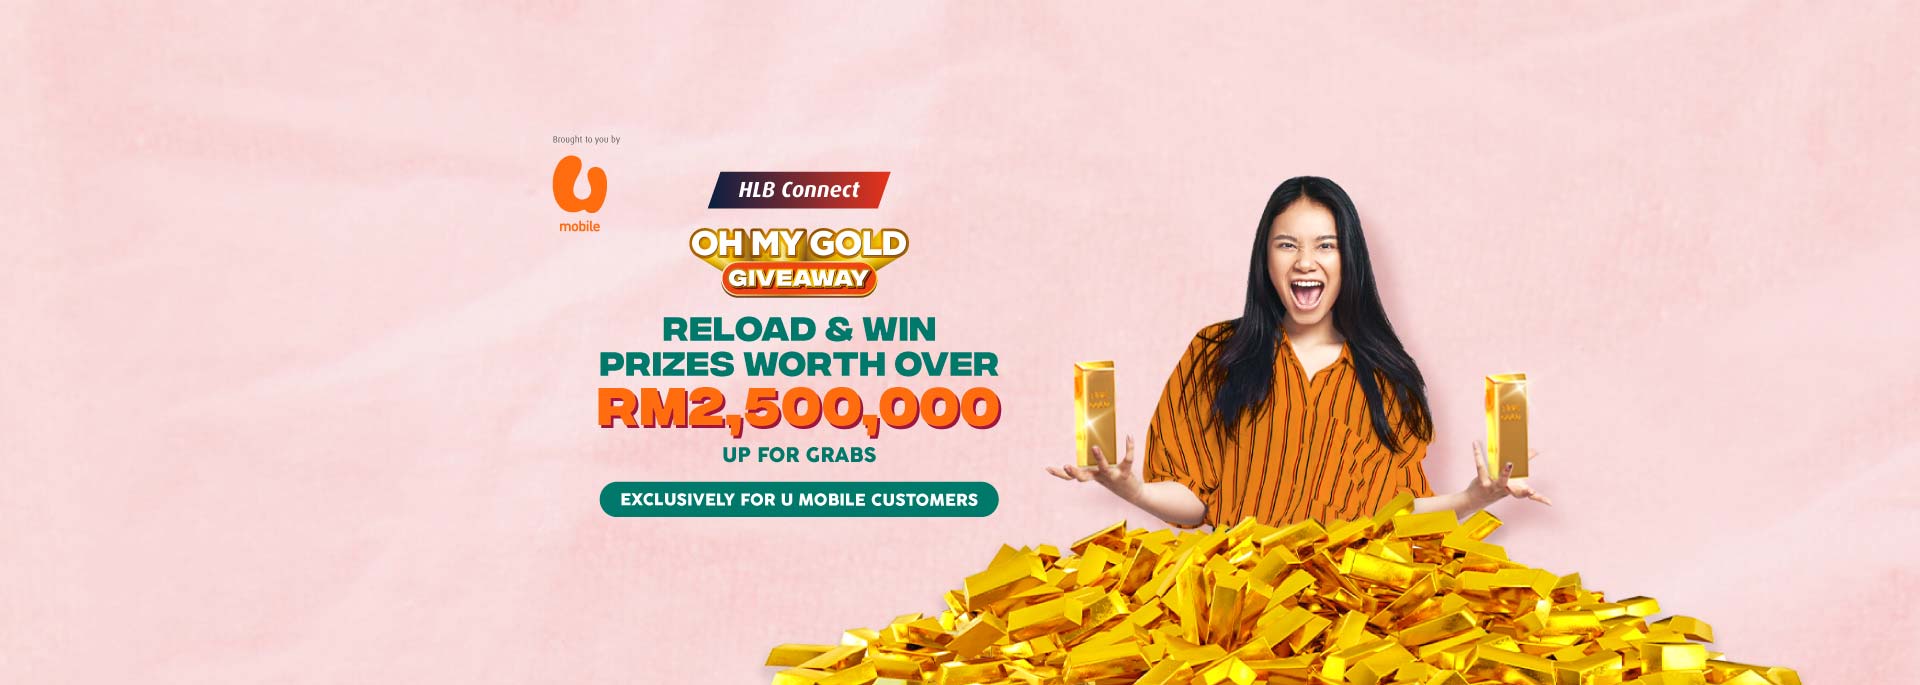 Prizes Worth Over RM2,500,000 Up For Grabs!